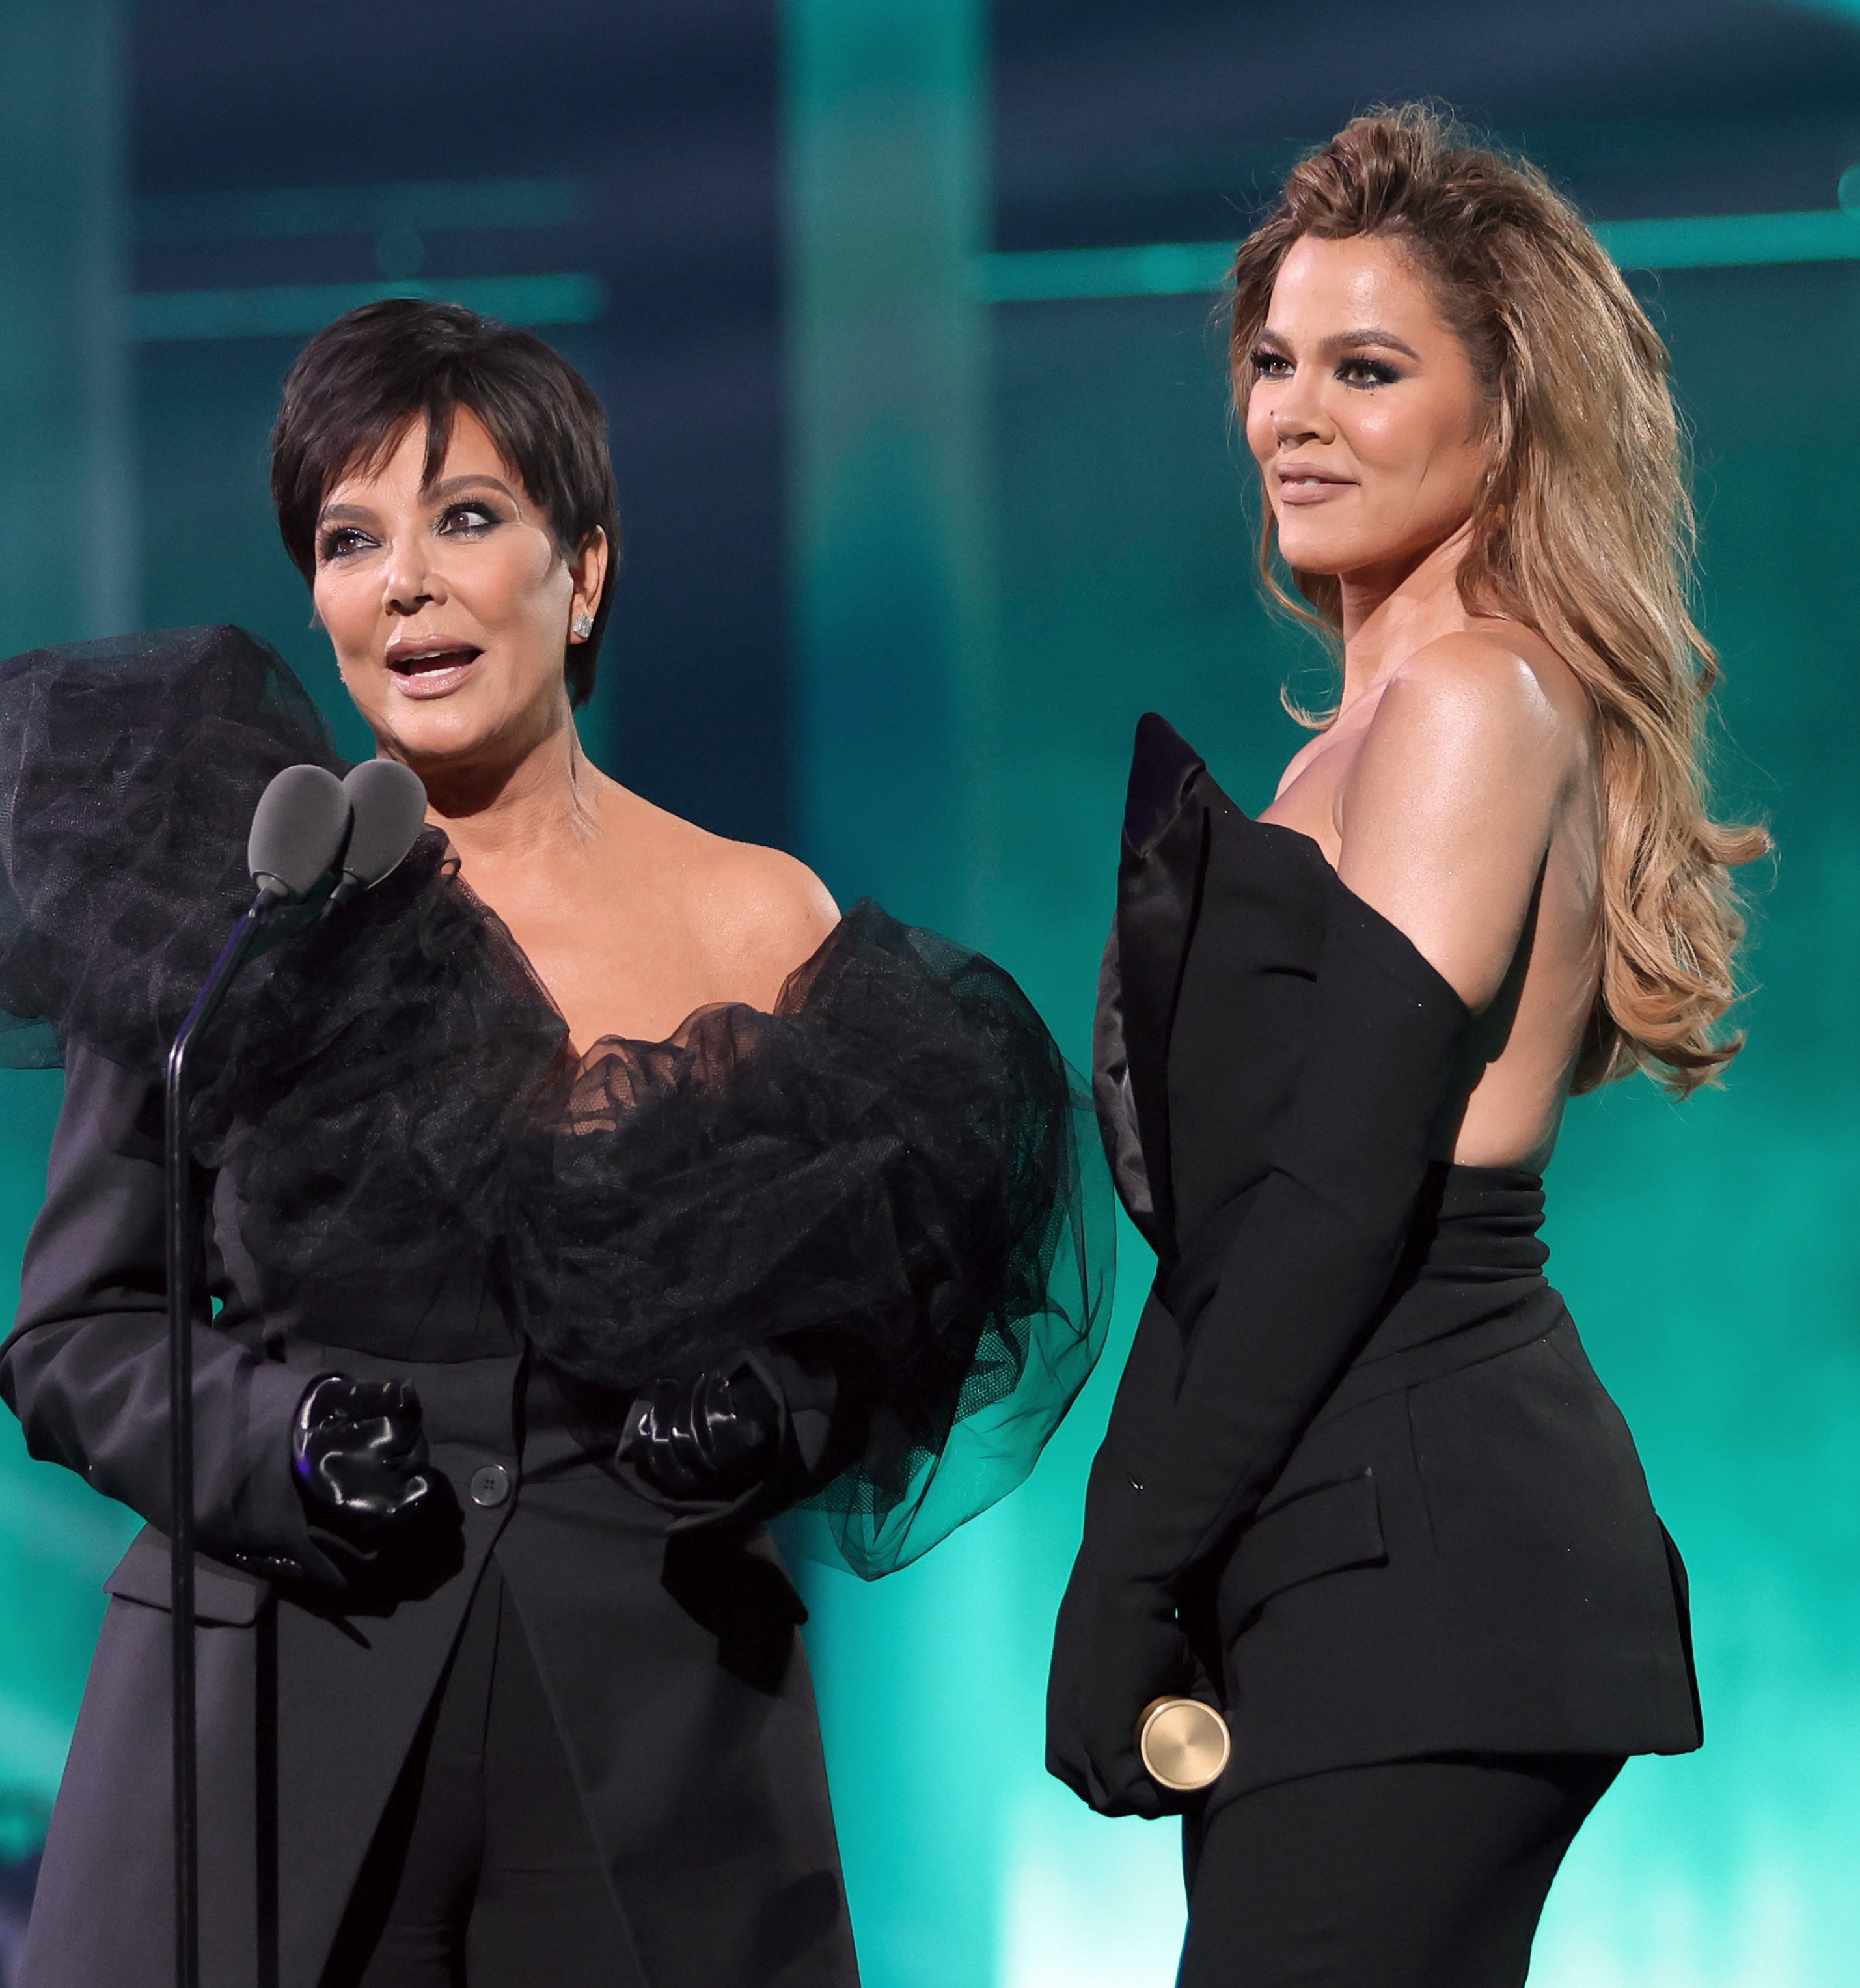 Kris Jenner and Khloé onstage at a microphone